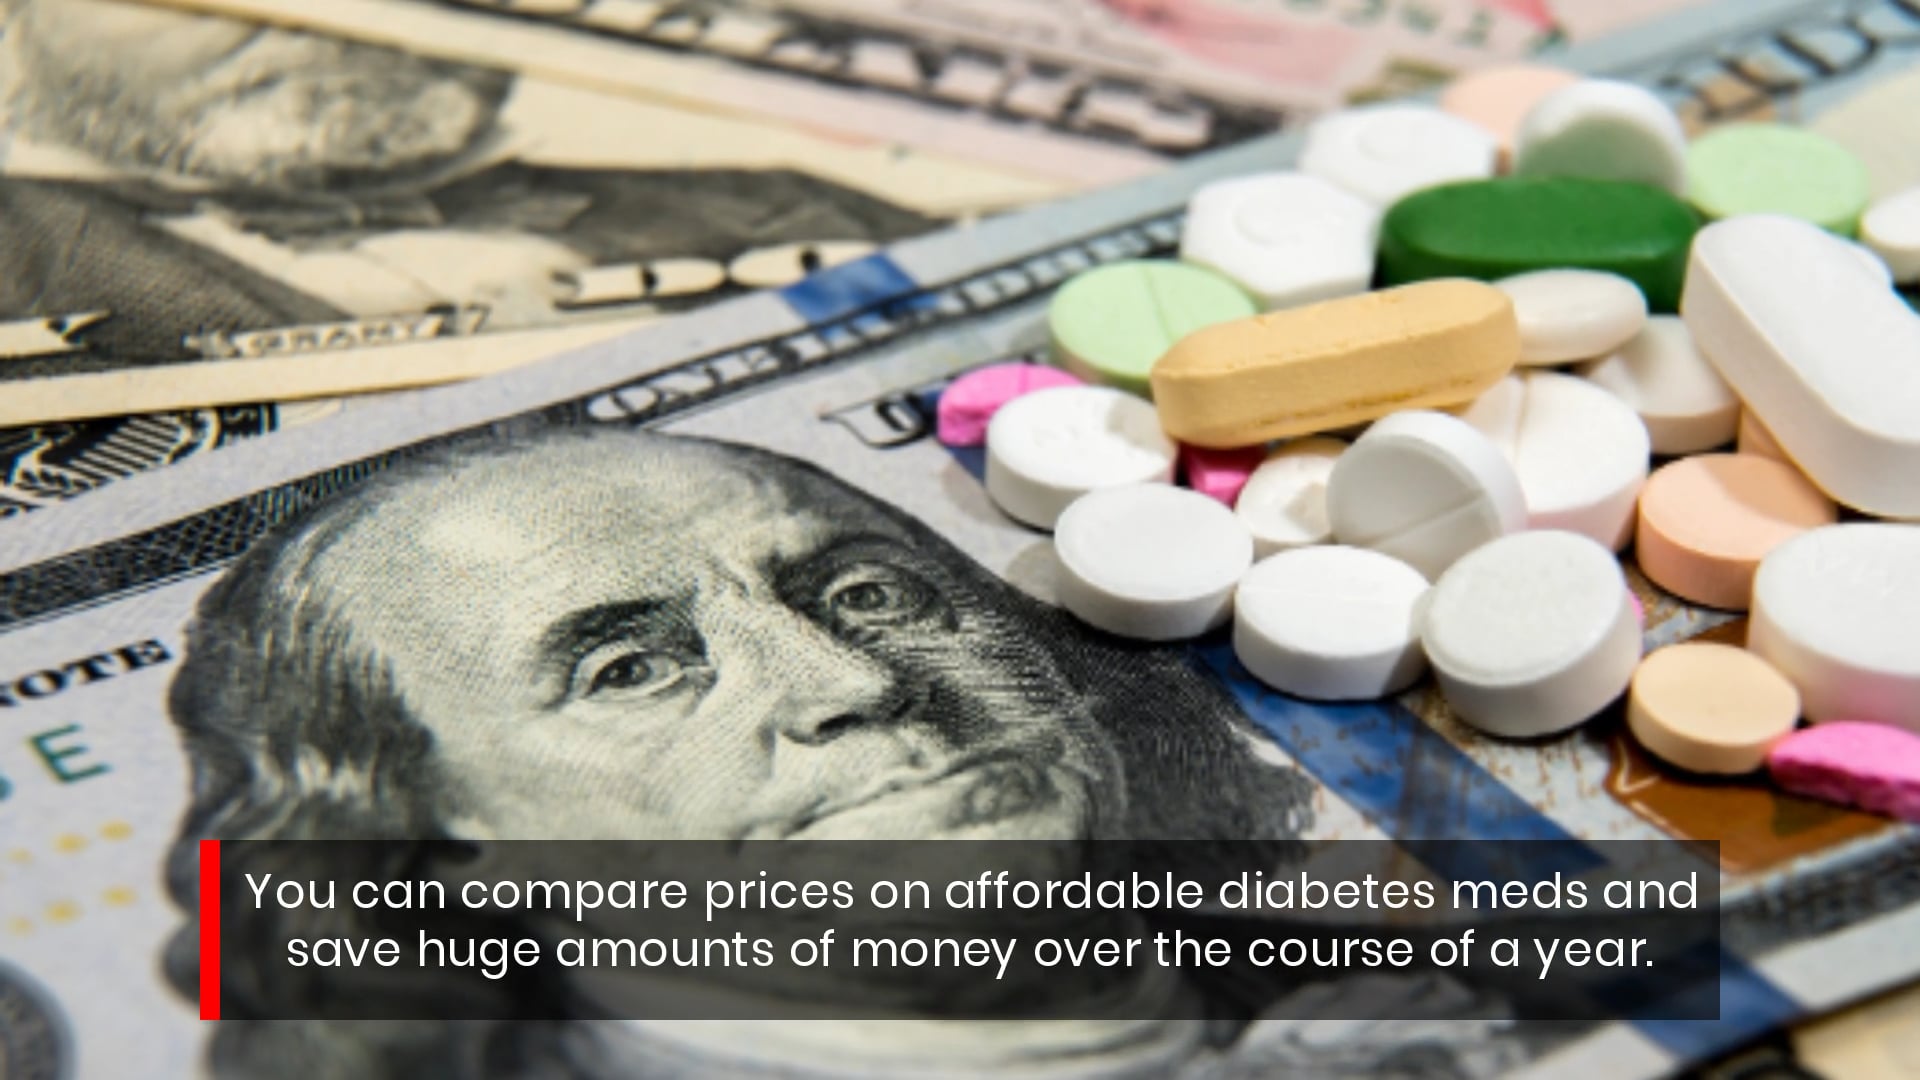 Save Money On Low-Cost Jardiance For Diabetes With This Comparison Site